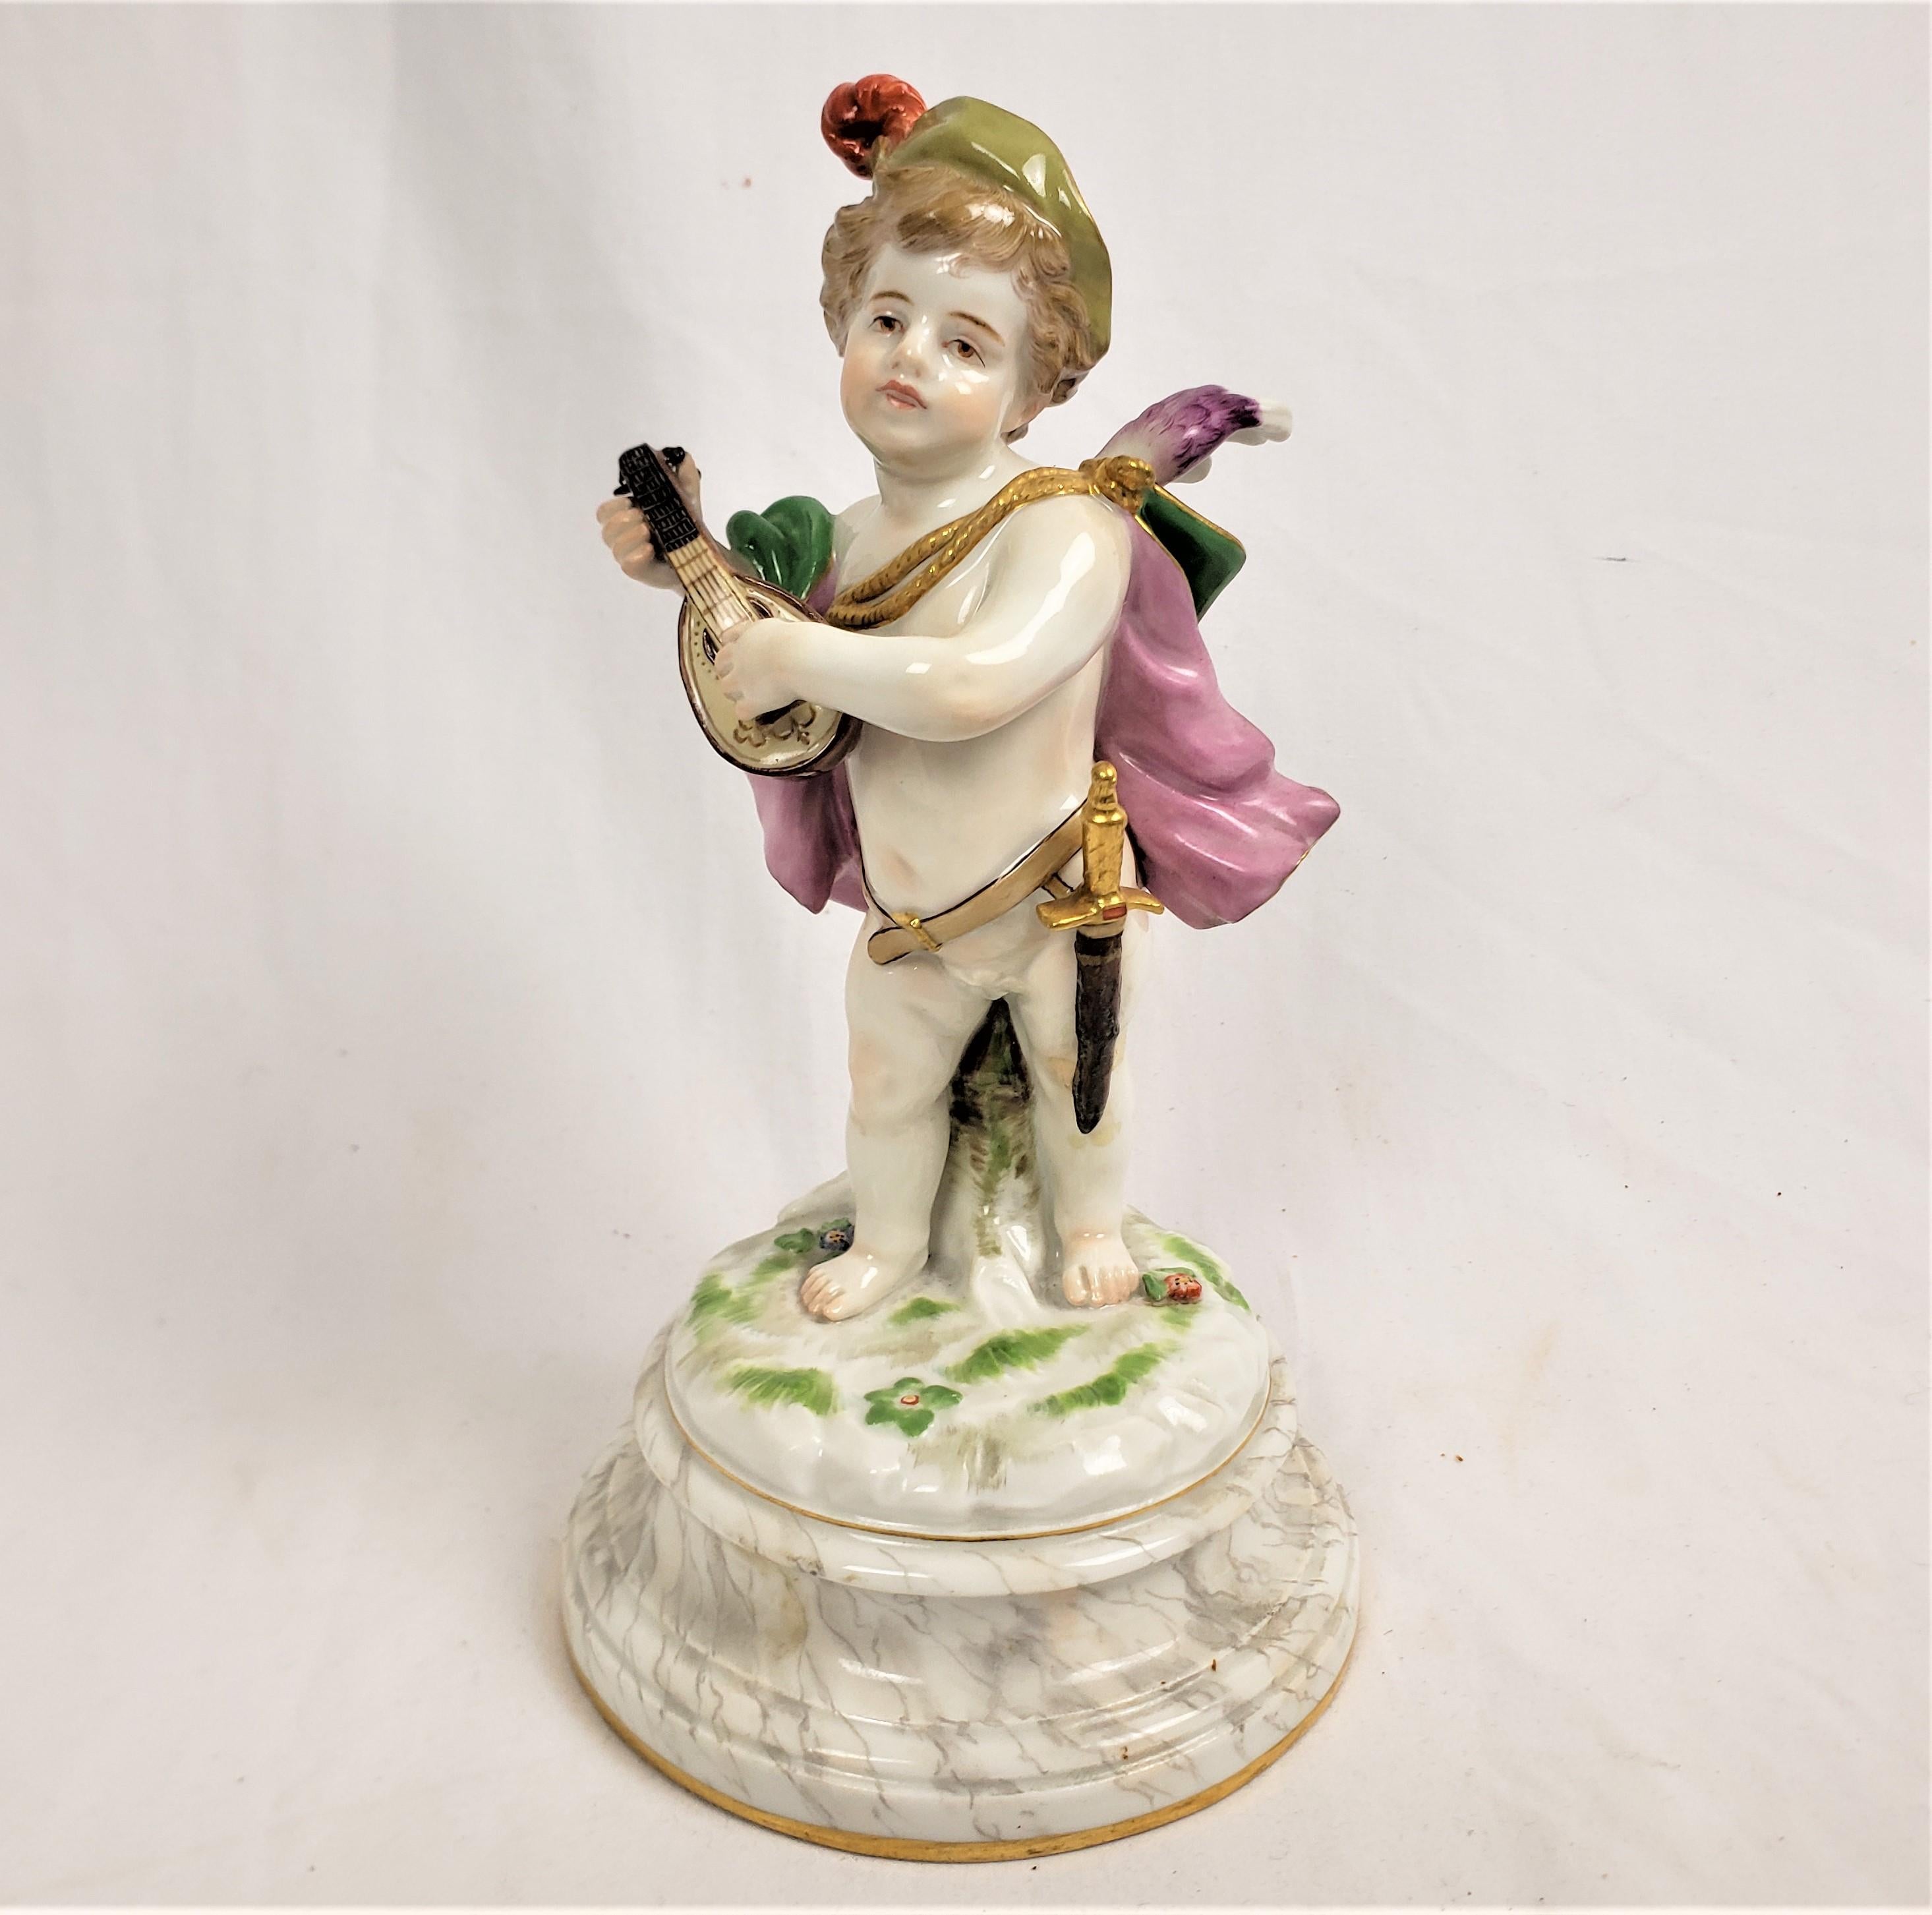 This antique figurine was made by the renowned Meissen factory of Germany in approximately 1850 in their period Dresden romantic style. The figurine is composed of their paste porcelain and depicts a young child wearing a cape and cap and sword,